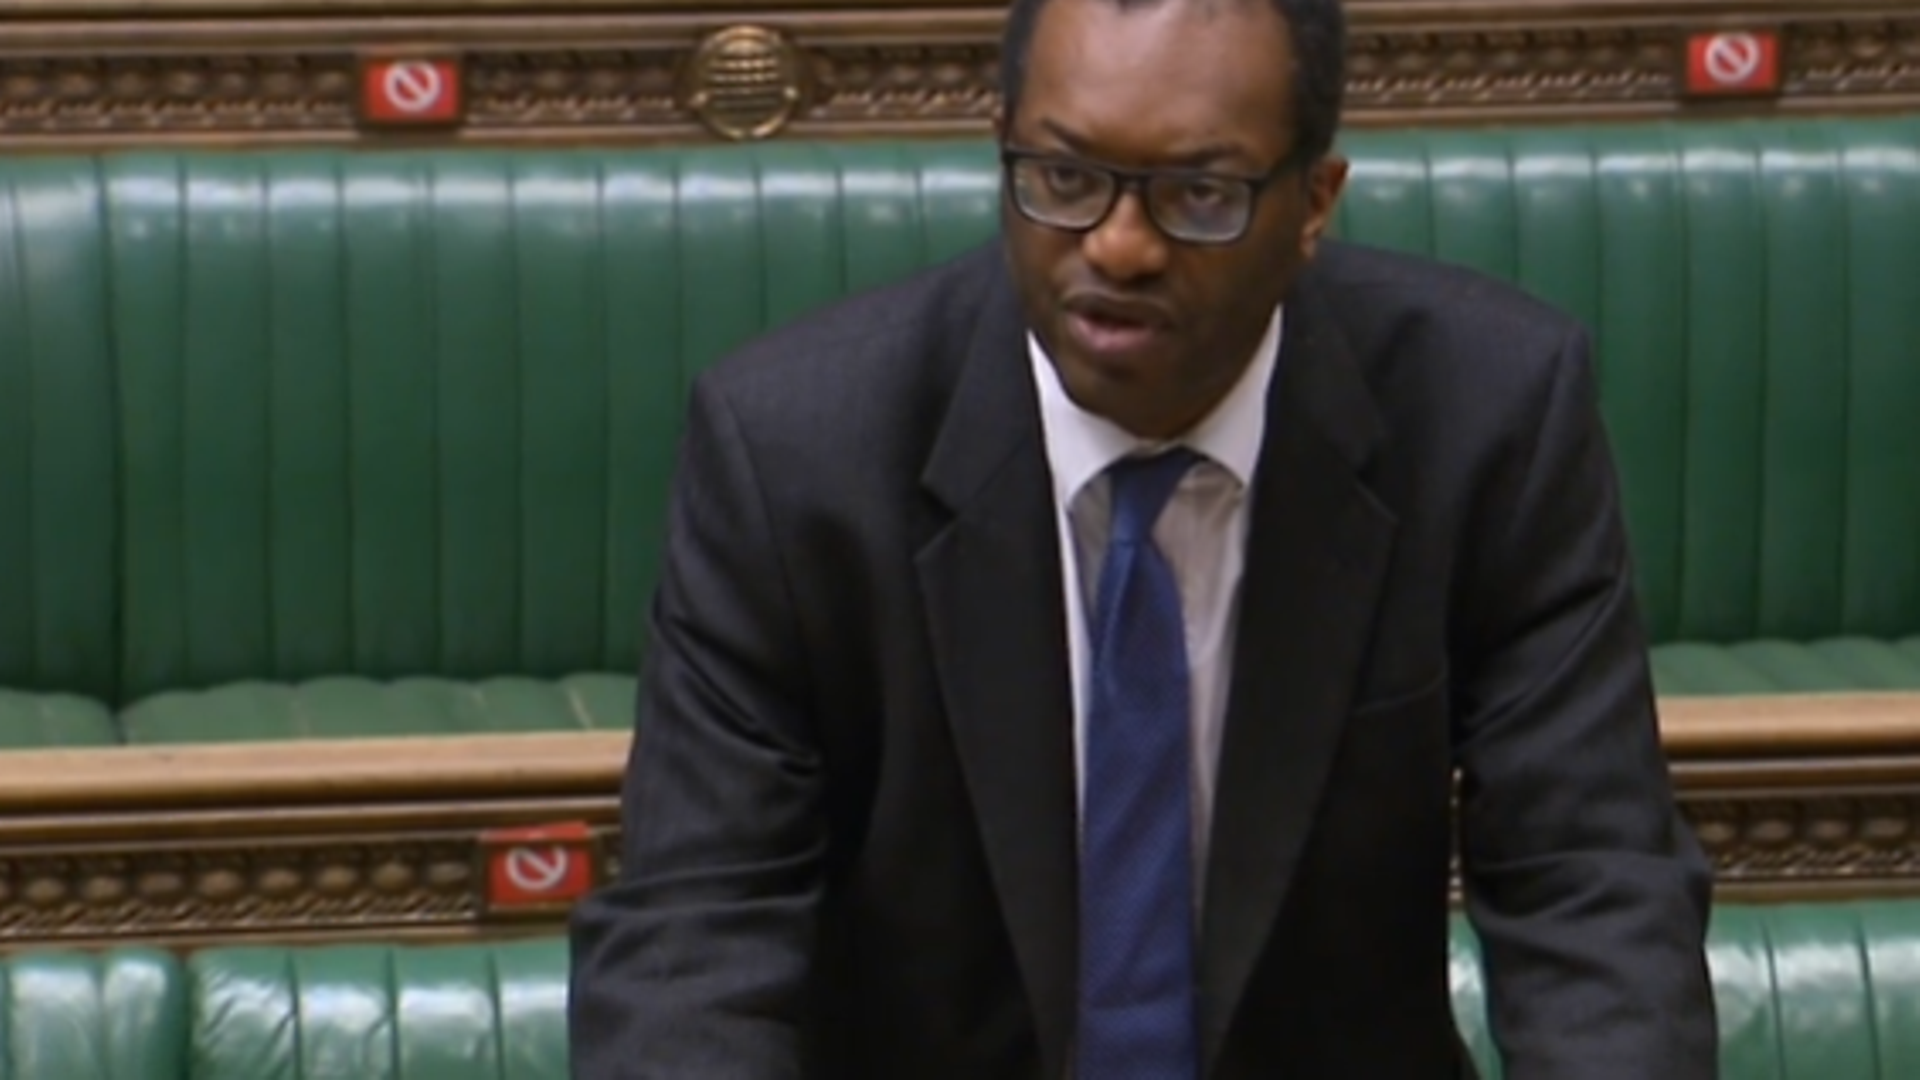 Kwasi Kwarteng responds to a debate in the House of Commons - Credit: Parliament Live